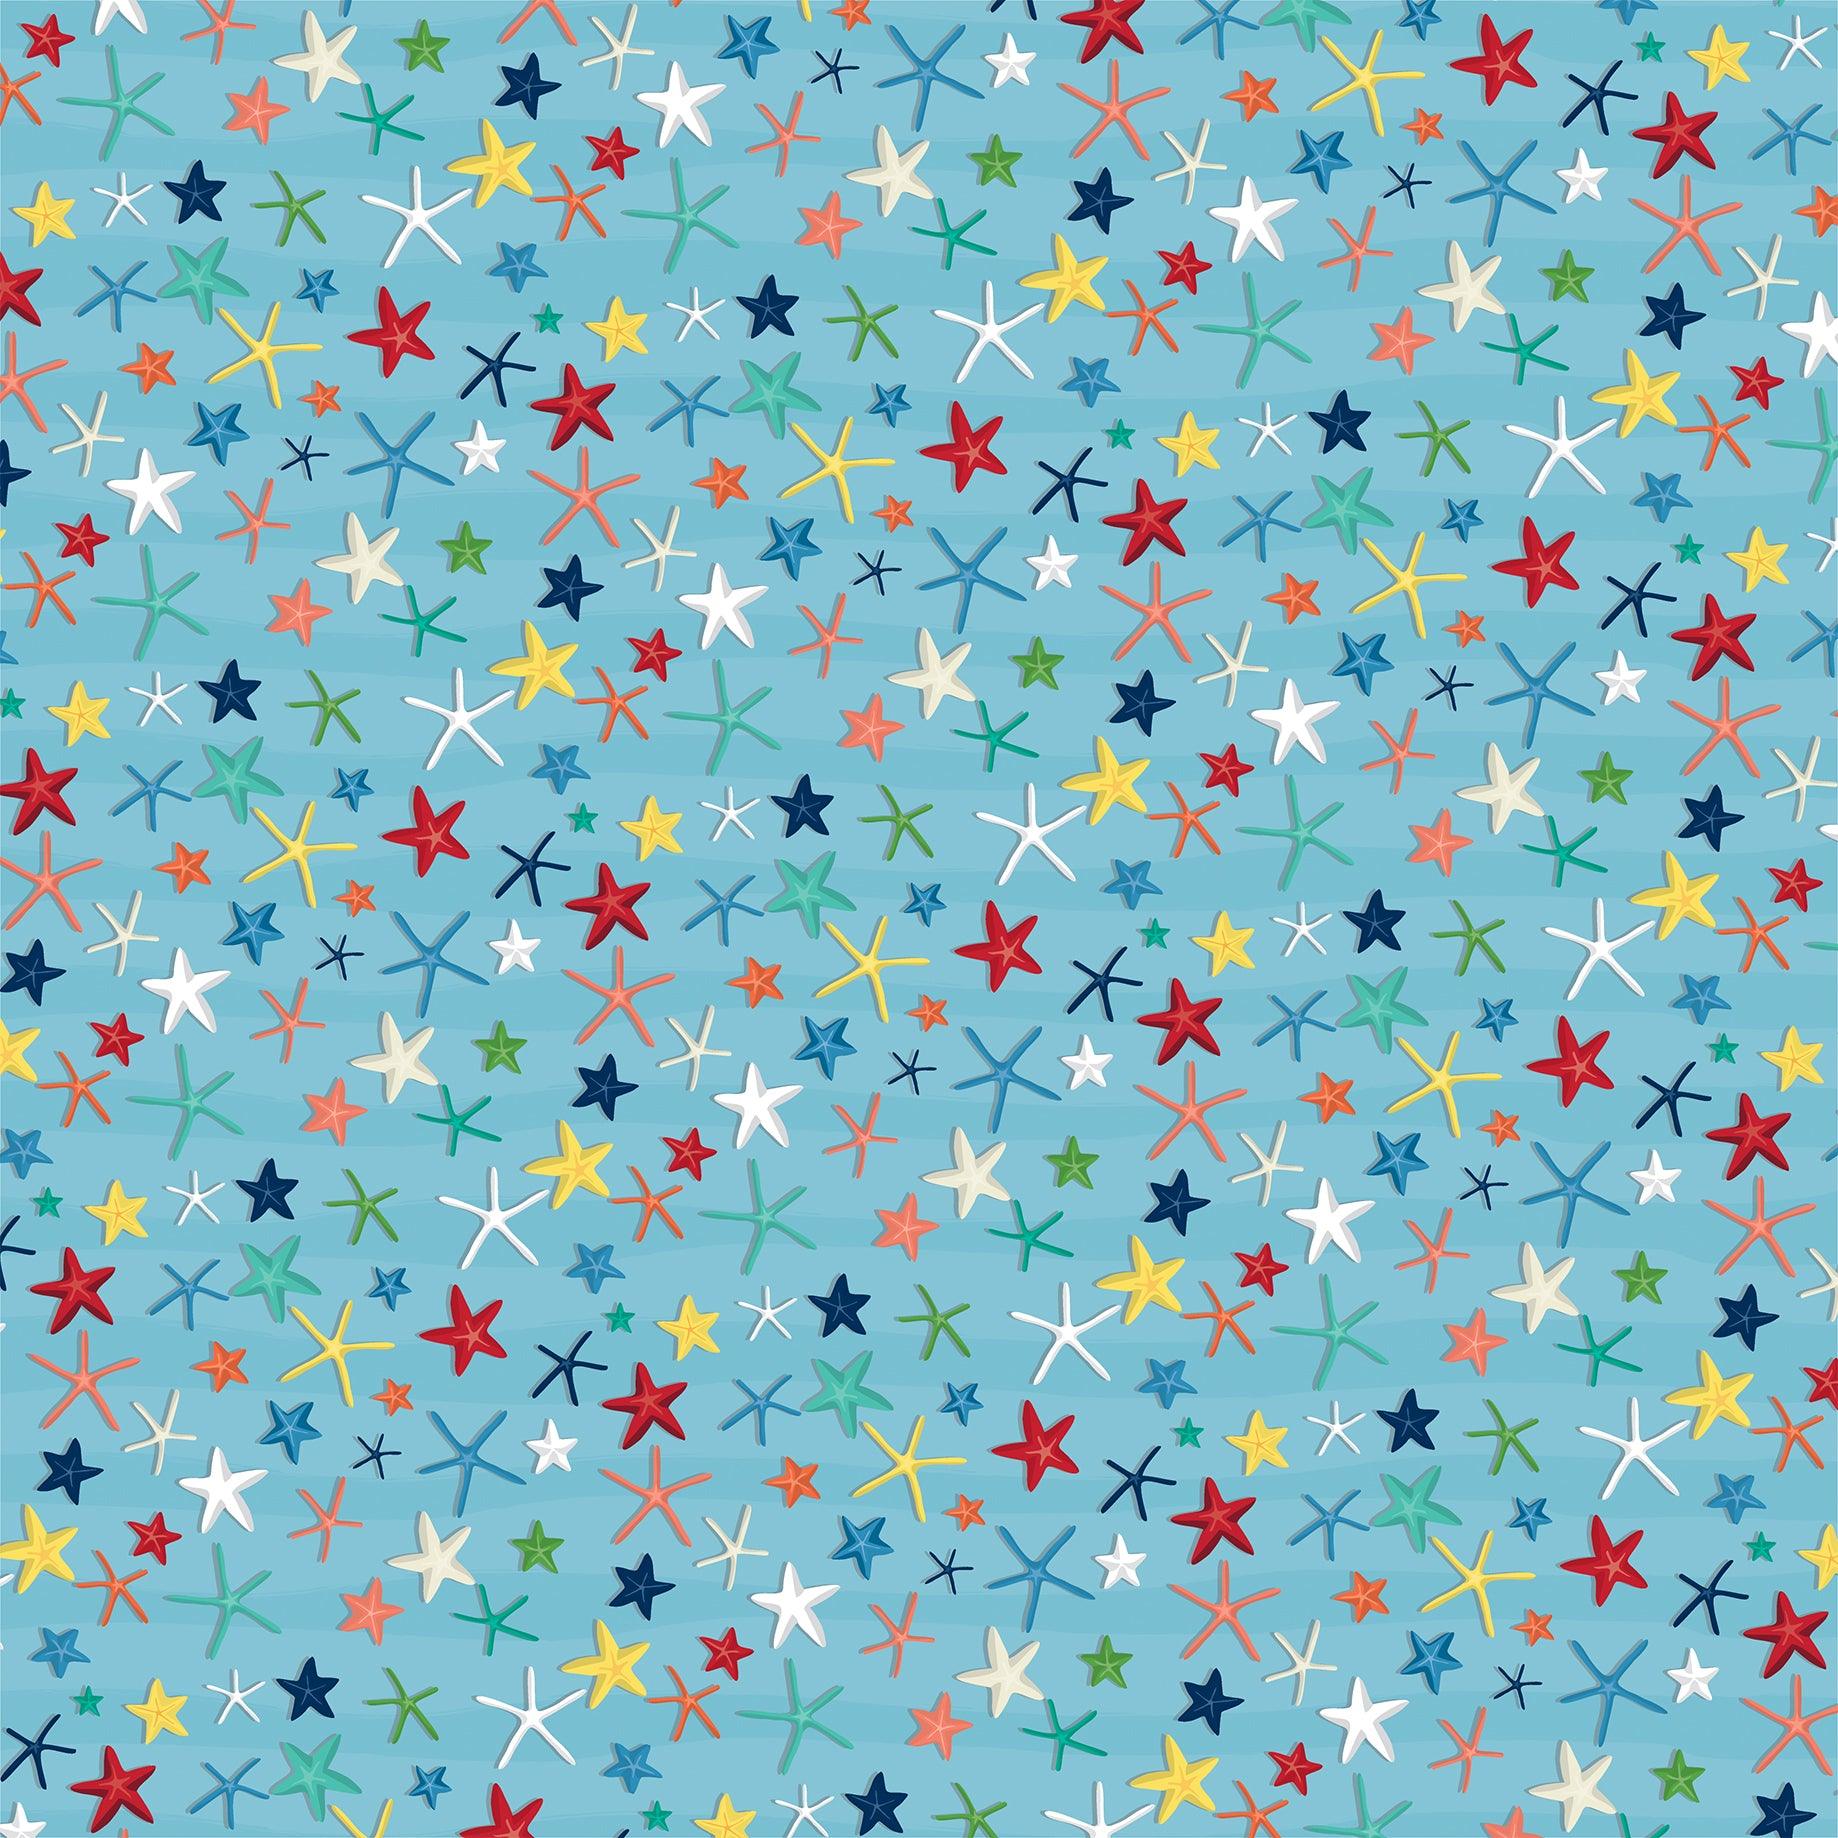 Beach Party Collection Sea Starfish 12 x 12 Double-Sided Scrapbook Paper by Carta Bella - Scrapbook Supply Companies